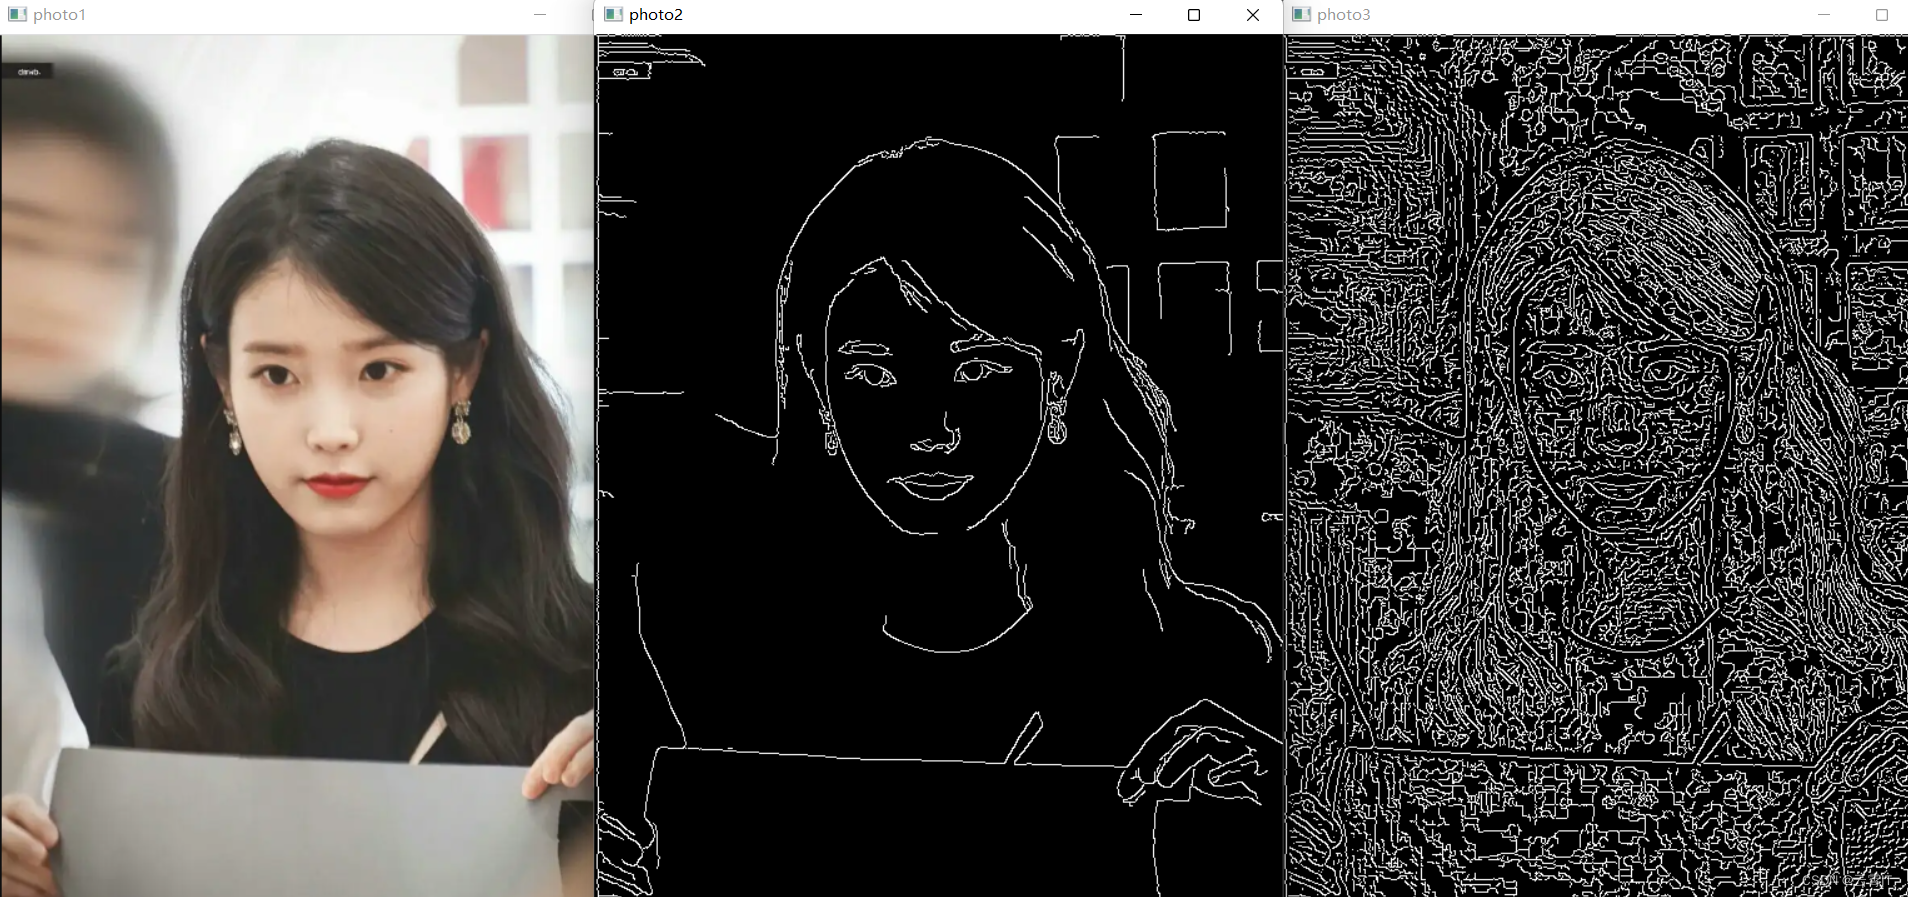 How to Use OpenCV " cv2 " in Python